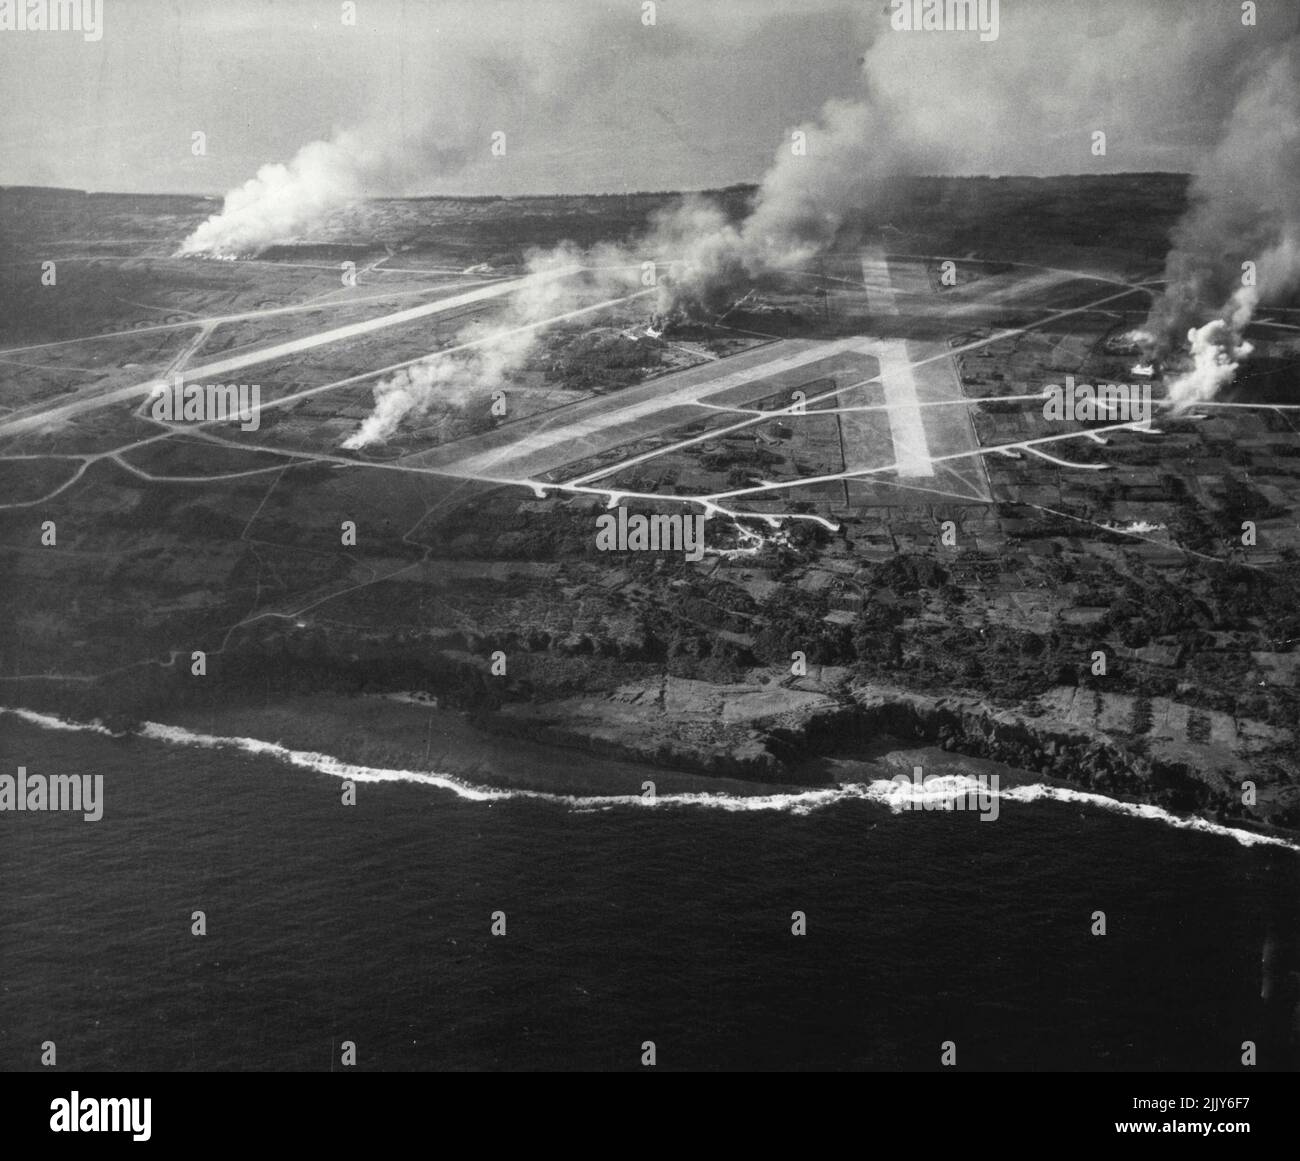 Ie Island Bombed And Strafed: Buildings, defense installations and planes in flames as a result of bombings and strafing by carrier based planes of the Third Pacific Fleet under Admiral William F. Halsay, Jr., USN, which struck Ie Island on 9 October 1944. (WLT). Ie Island is just west of Okinawa Island in the Ryukyu Group some 850 miles from Tokyo. October 17, 1944. (Photo by Official U.S. Navy Photograph). Stock Photo